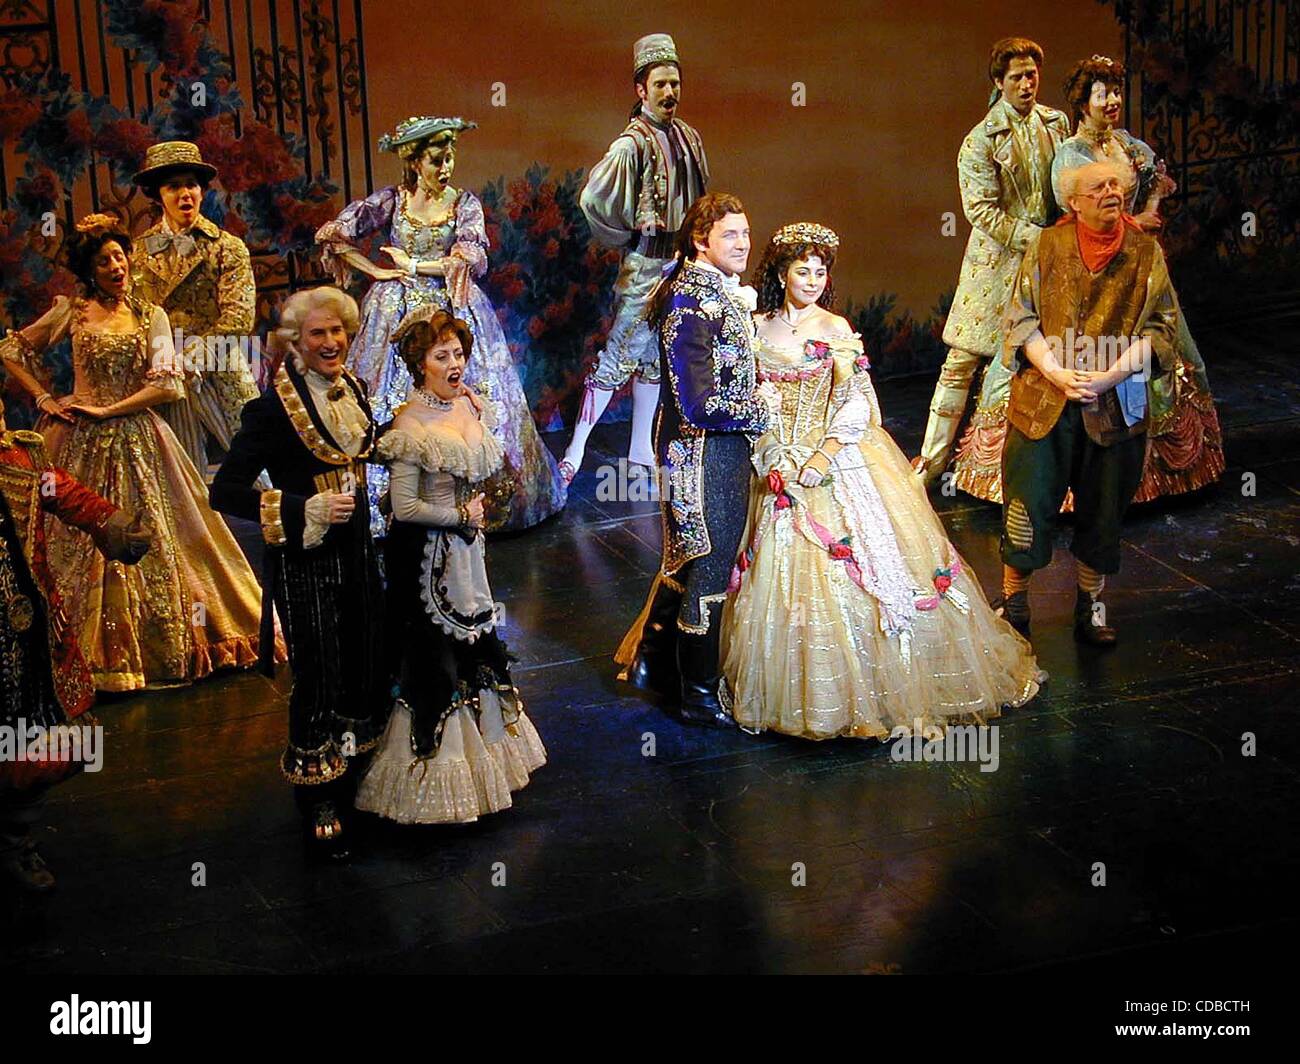 Jan 1 2011 New York New York U S Beauty And The Beast At The Lunt Fontanne Theatre N Y C 12 4 02 Jamie Lynn Sigler Plays Belle 2002 K27907bc Credit Image A C Bruce Cotler Globe Photos Zumapress Com